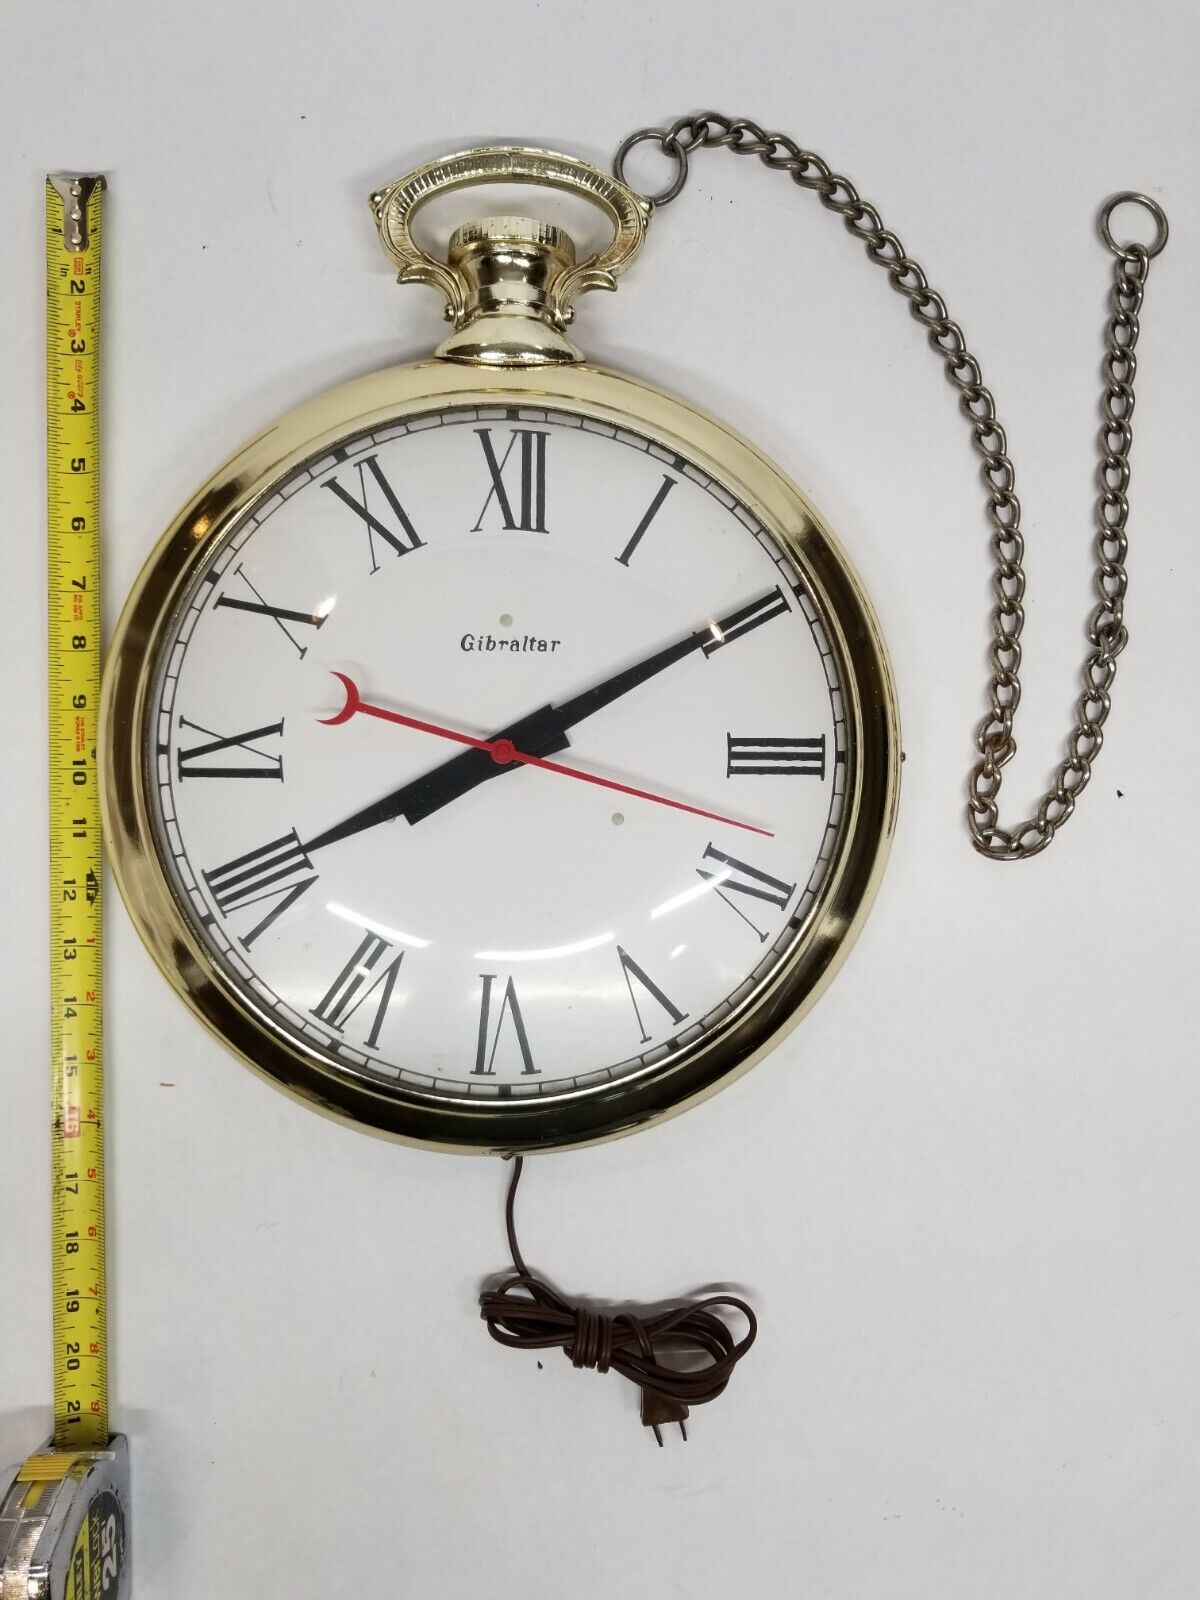 Vintage Pocket Watch Wall Clock Gibraltar Large With Chain No 72 TESTED & WORKS